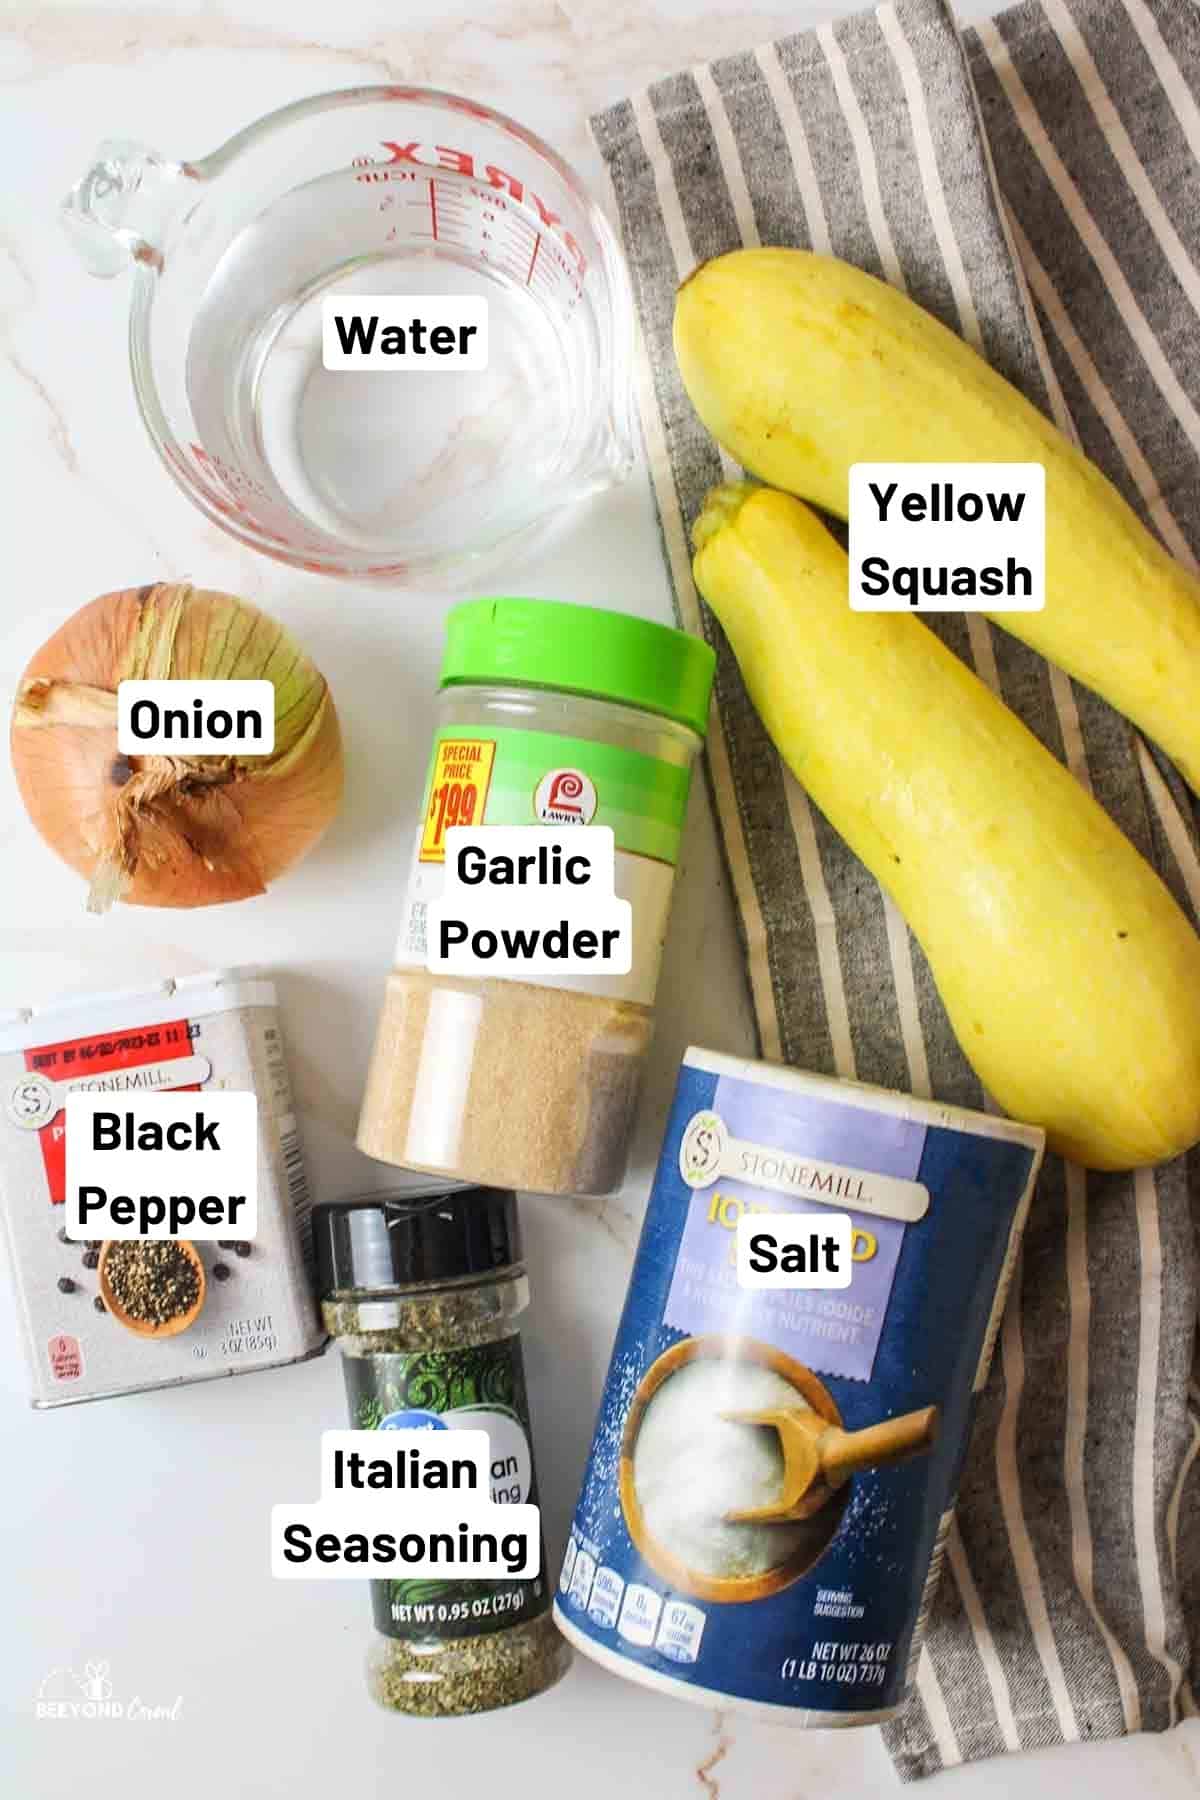 a covered bowl of yellow squash and onions next to a box of cling wrap and pitcher of water